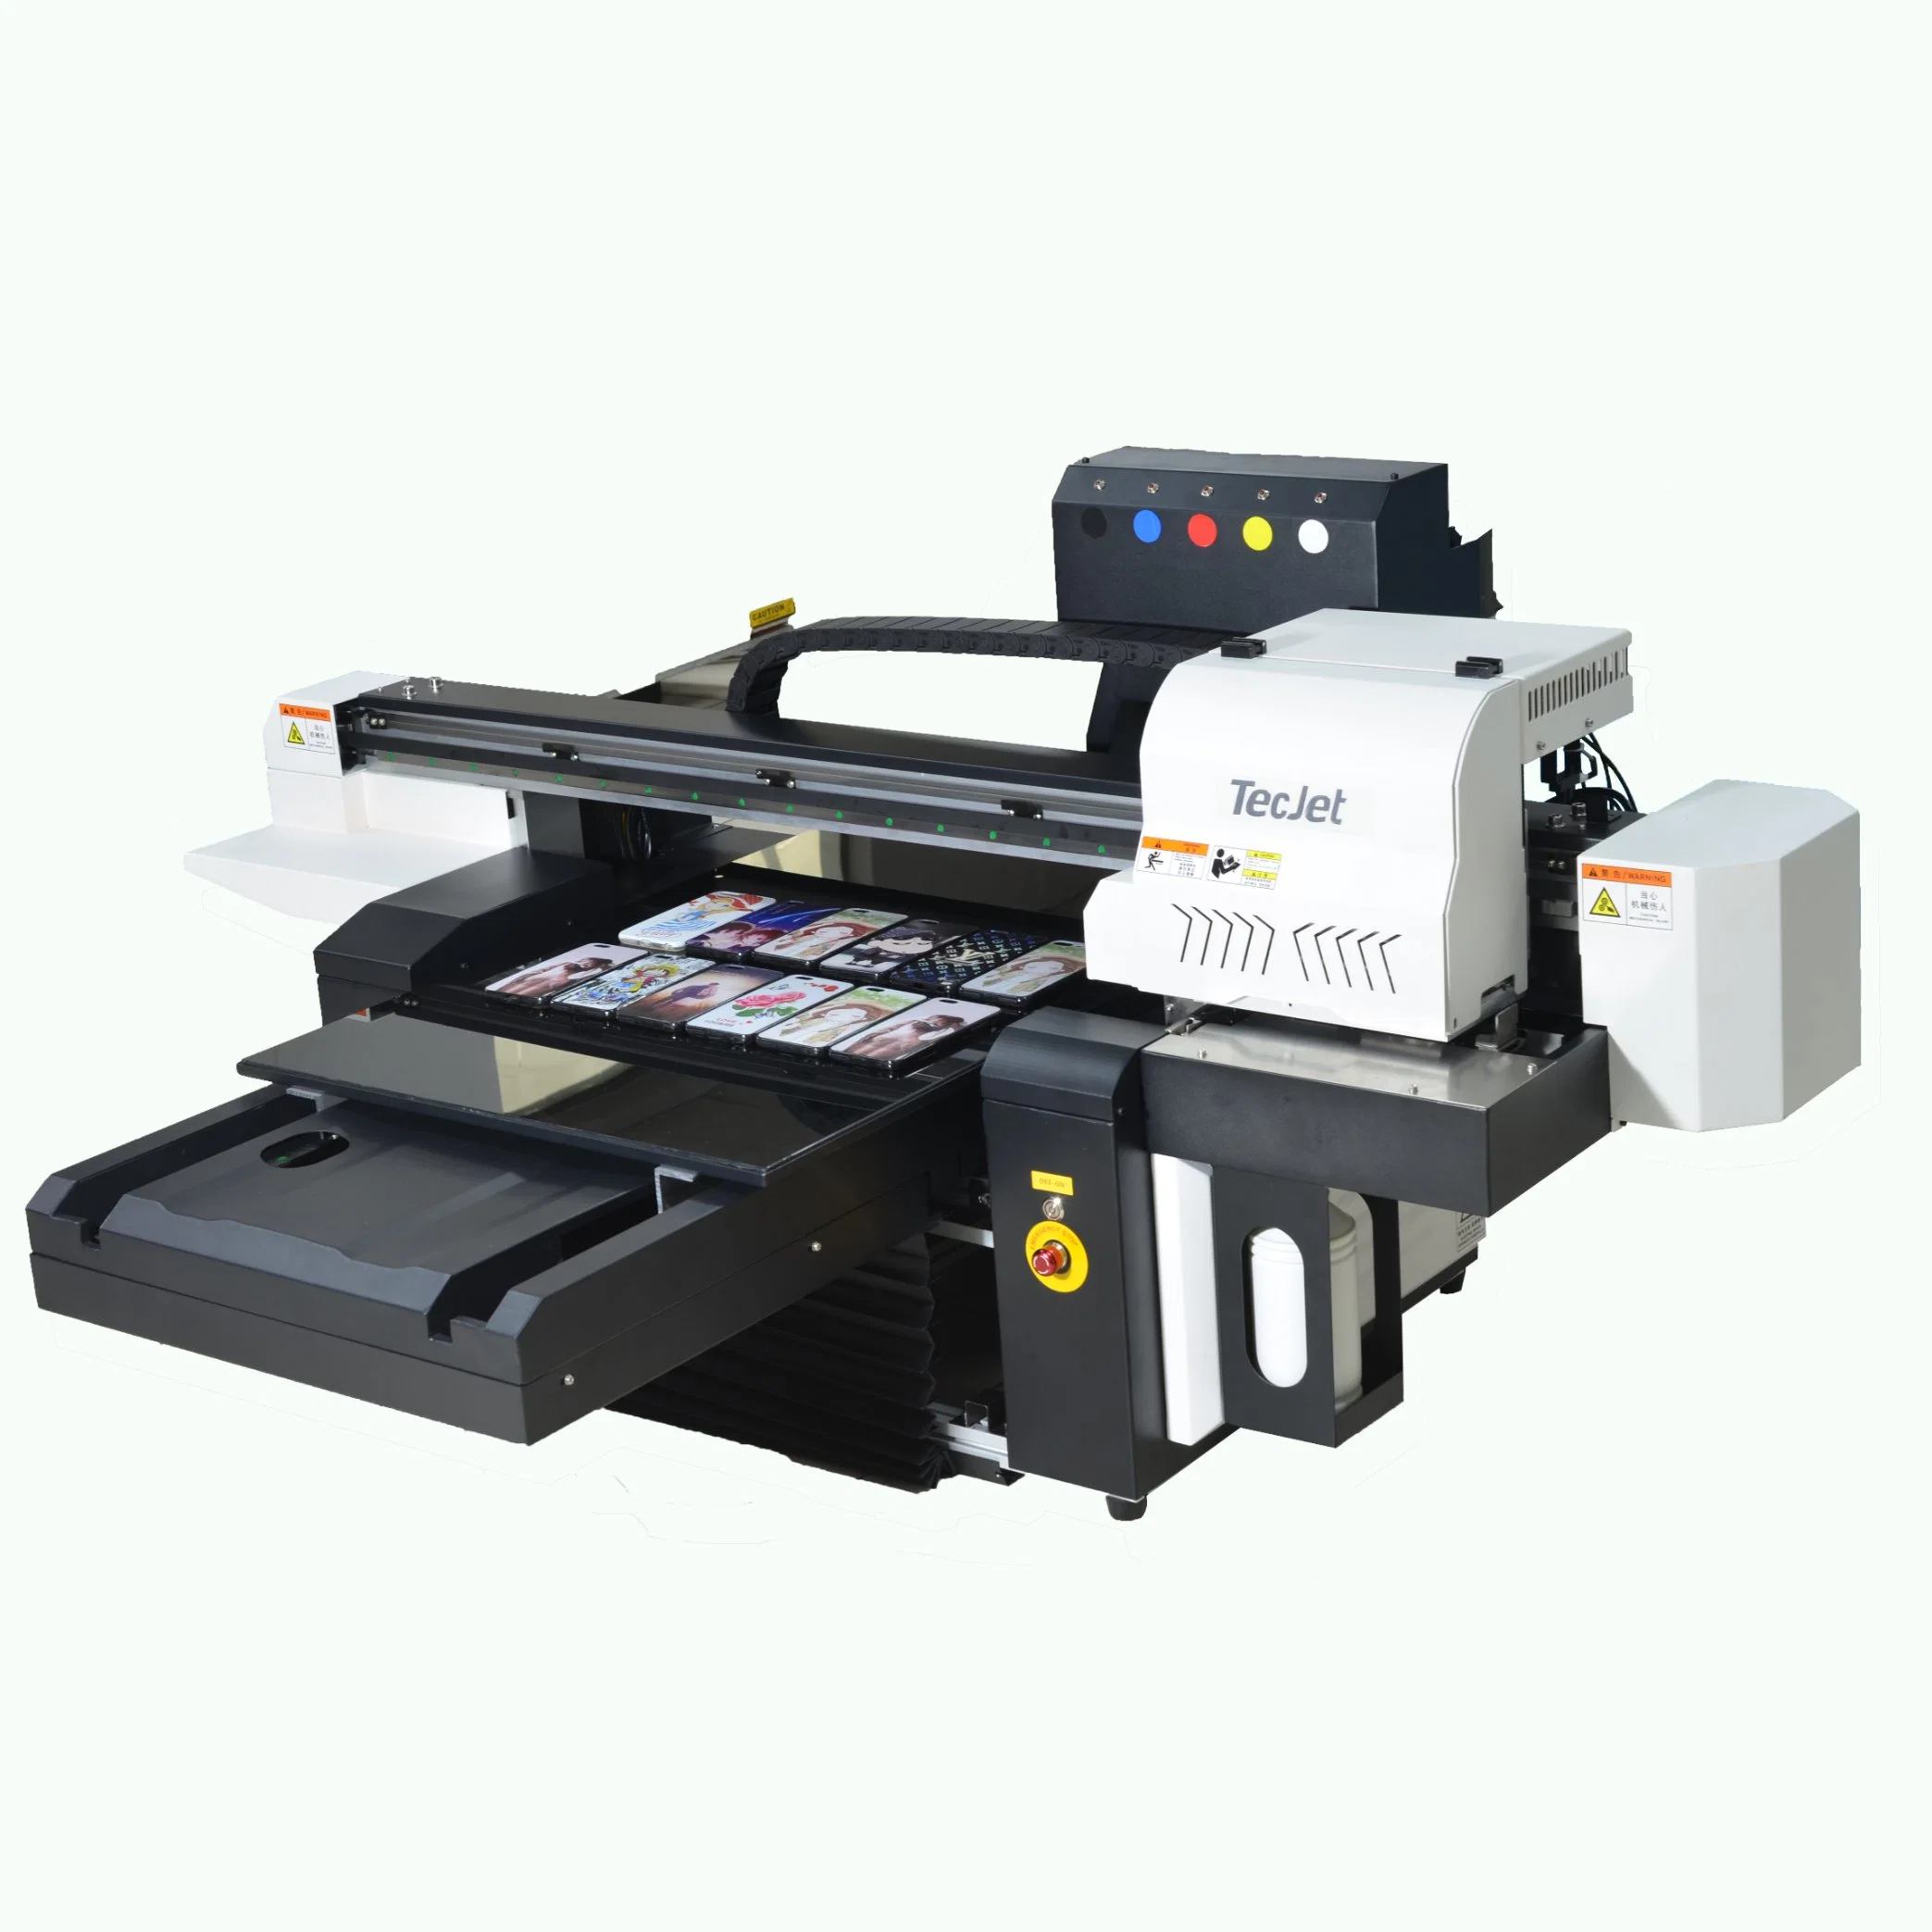 Tecjet Dx5, Dx7, XP600 Printhead 6090 UV Flatbed Printer Equipment for Small Business